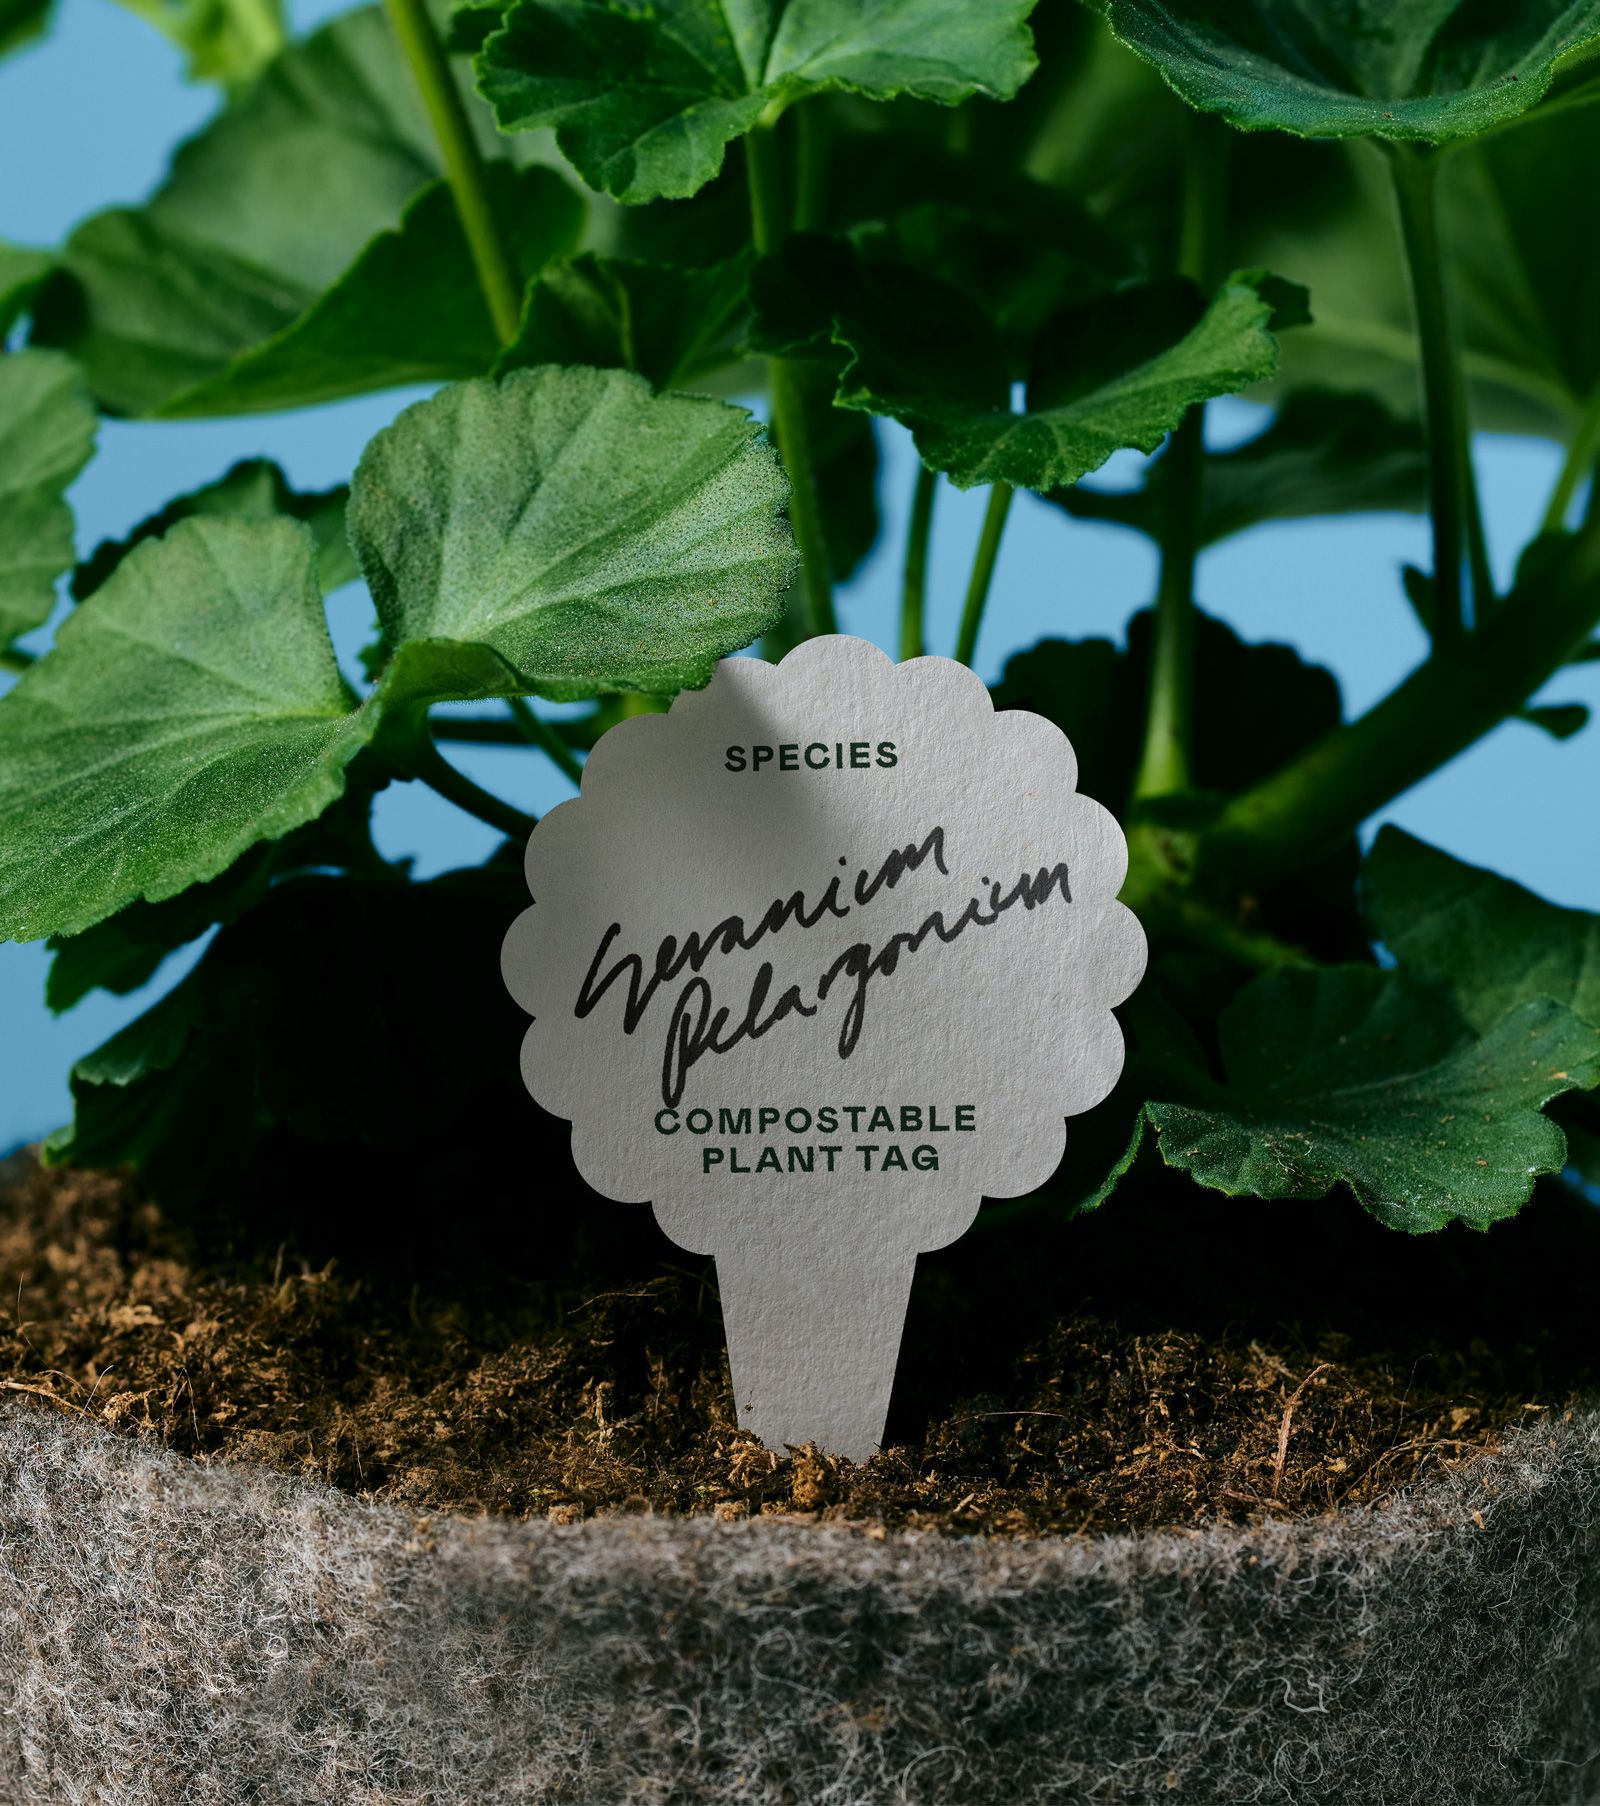 Logo, print, packaging and website design by New Zealand-based Seachange for compostable wool plant pot brand The Wool Pot